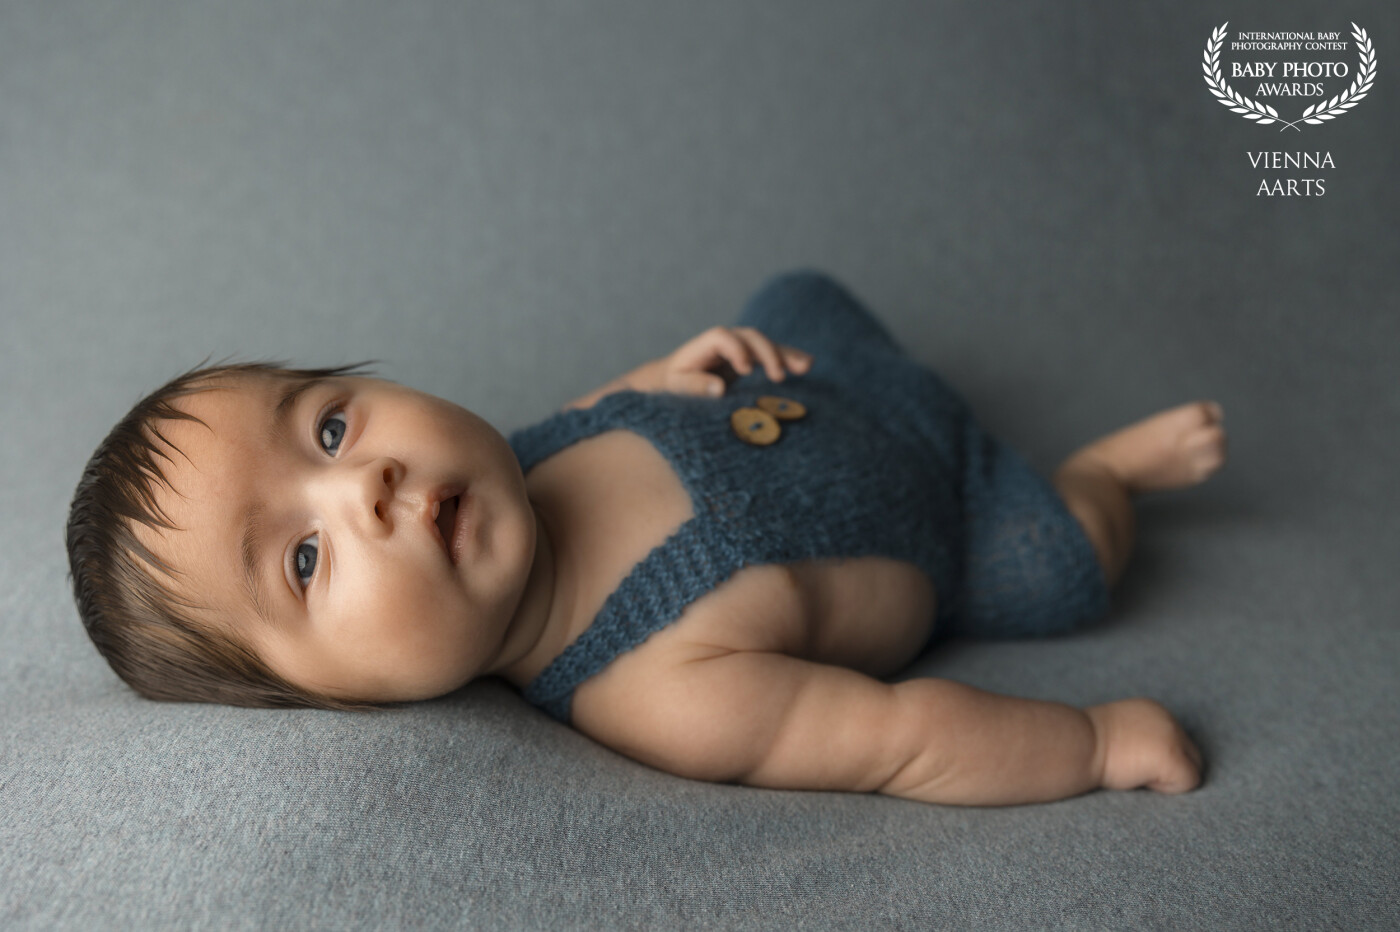 This cute 1 month old baby didn’t want to sleep in the session, so i makes photos of him while he was awake and i really love his eyes!